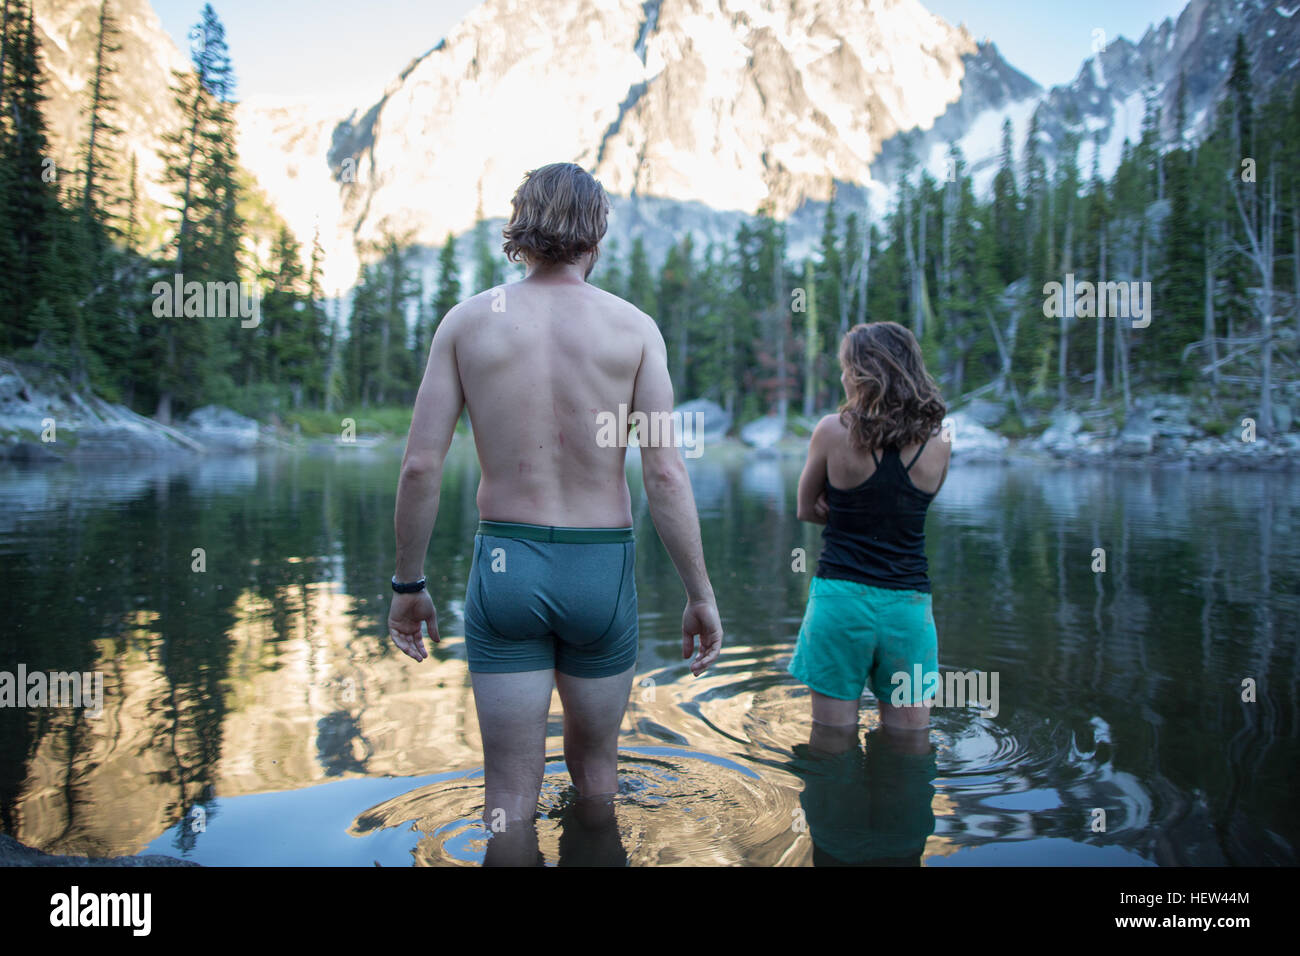 Young man and woman standing in lake, rear view, The Enchantments, Alpine Lakes Wilderness, Washington, USA Stock Photo